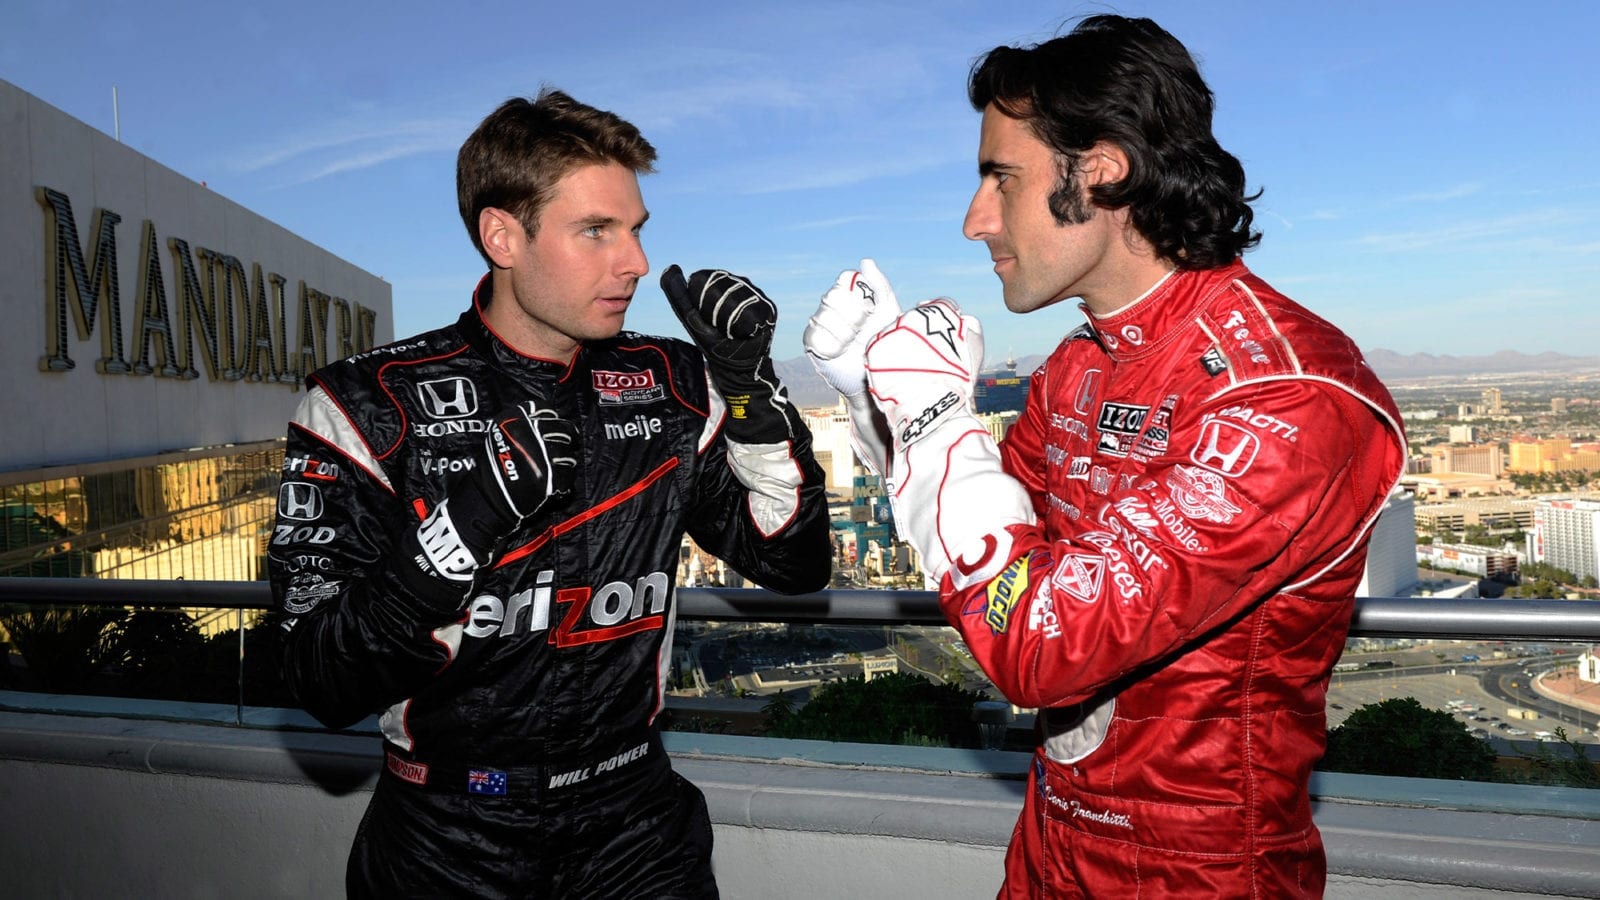 Will Power and Dario Franchitti in a mock fight